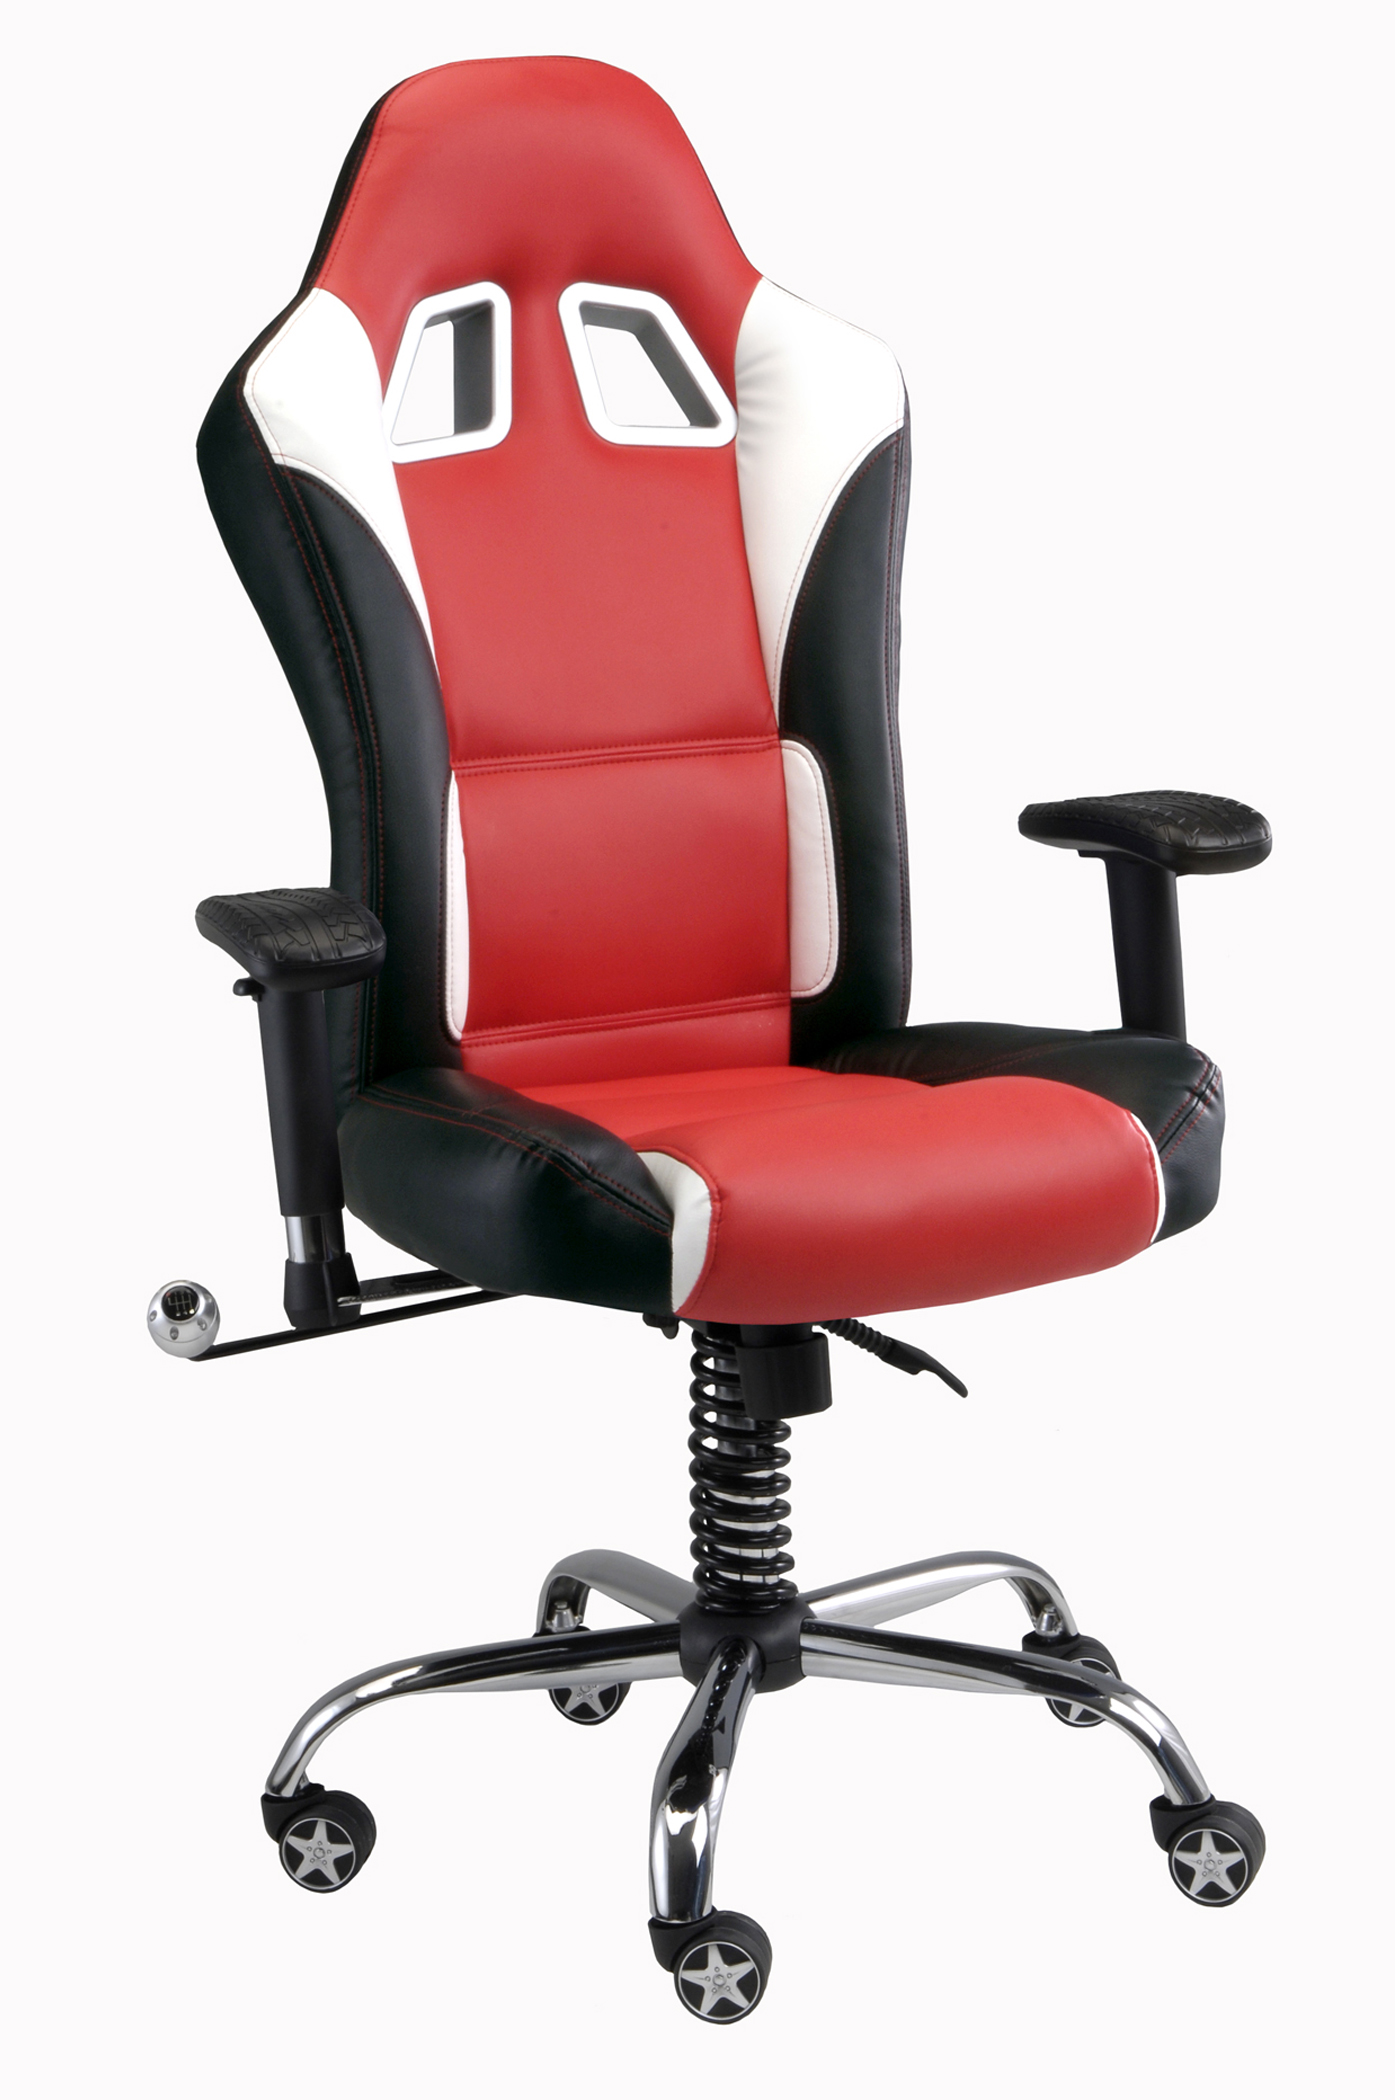 Intro-Tech Automotive, Pitstop Furniture, IN1100R SE Chair Red, Desk Chair